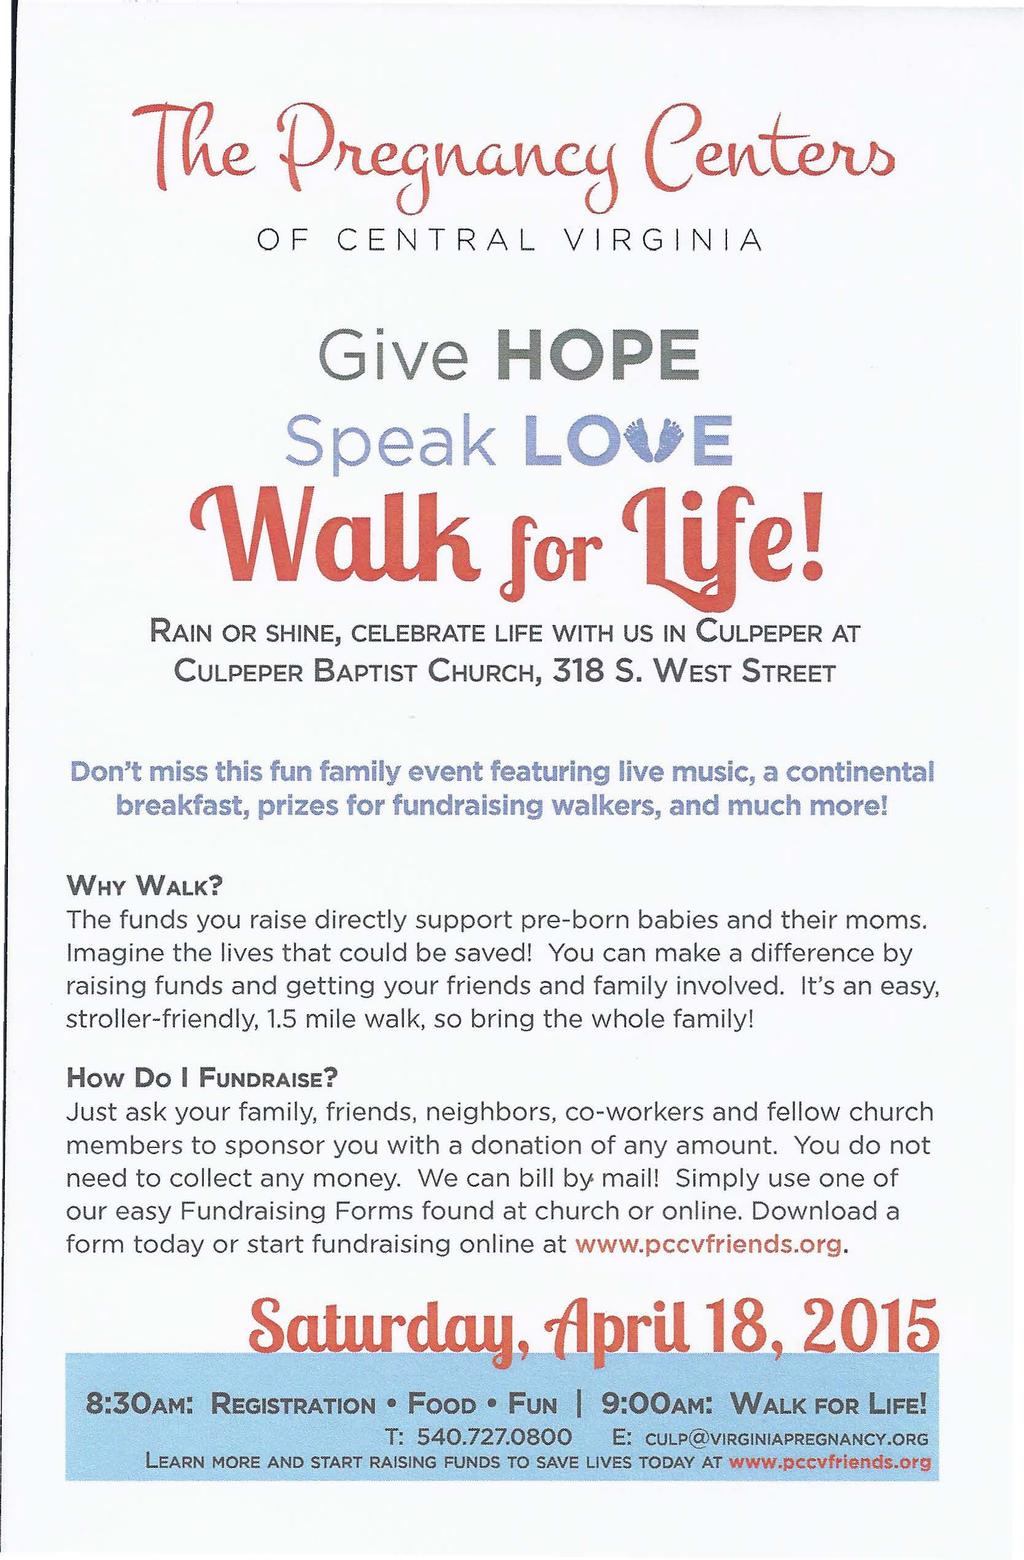 OF CENTR AL V IRGINI A Give HOPE Speak LO\IE 'Walk /or 'life! RAIN OR SHINE, CELEBRATE LIFE WITH US IN CULPEPER AT CULPEPER BAPTIST CHURCH, 318 s.